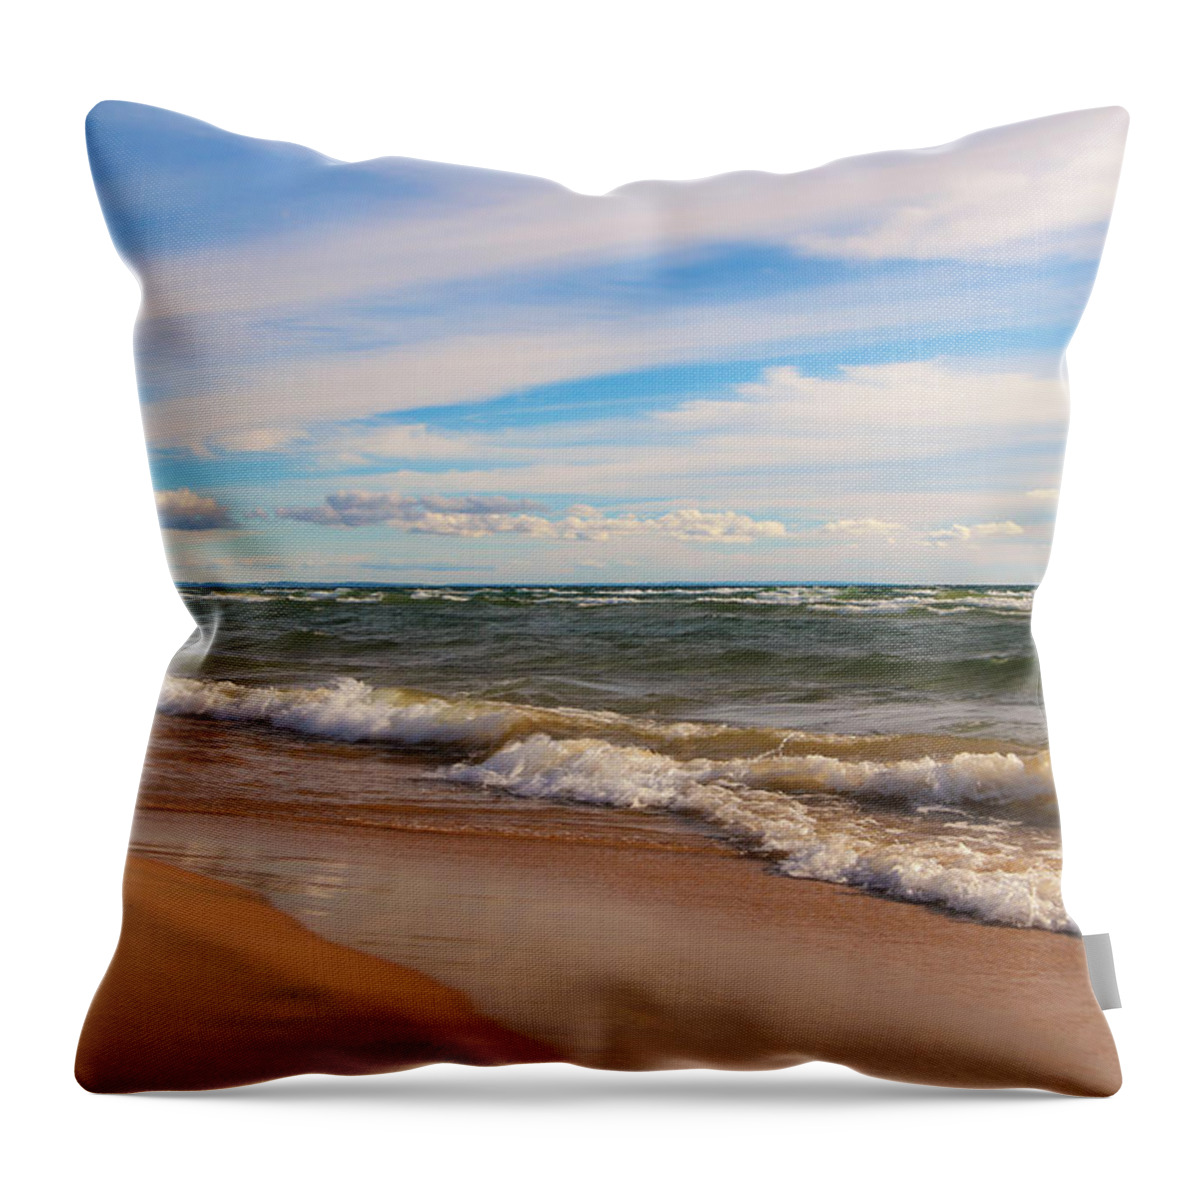 The Beat Goes On Throw Pillow featuring the photograph The Beat Goes On by Rachel Cohen